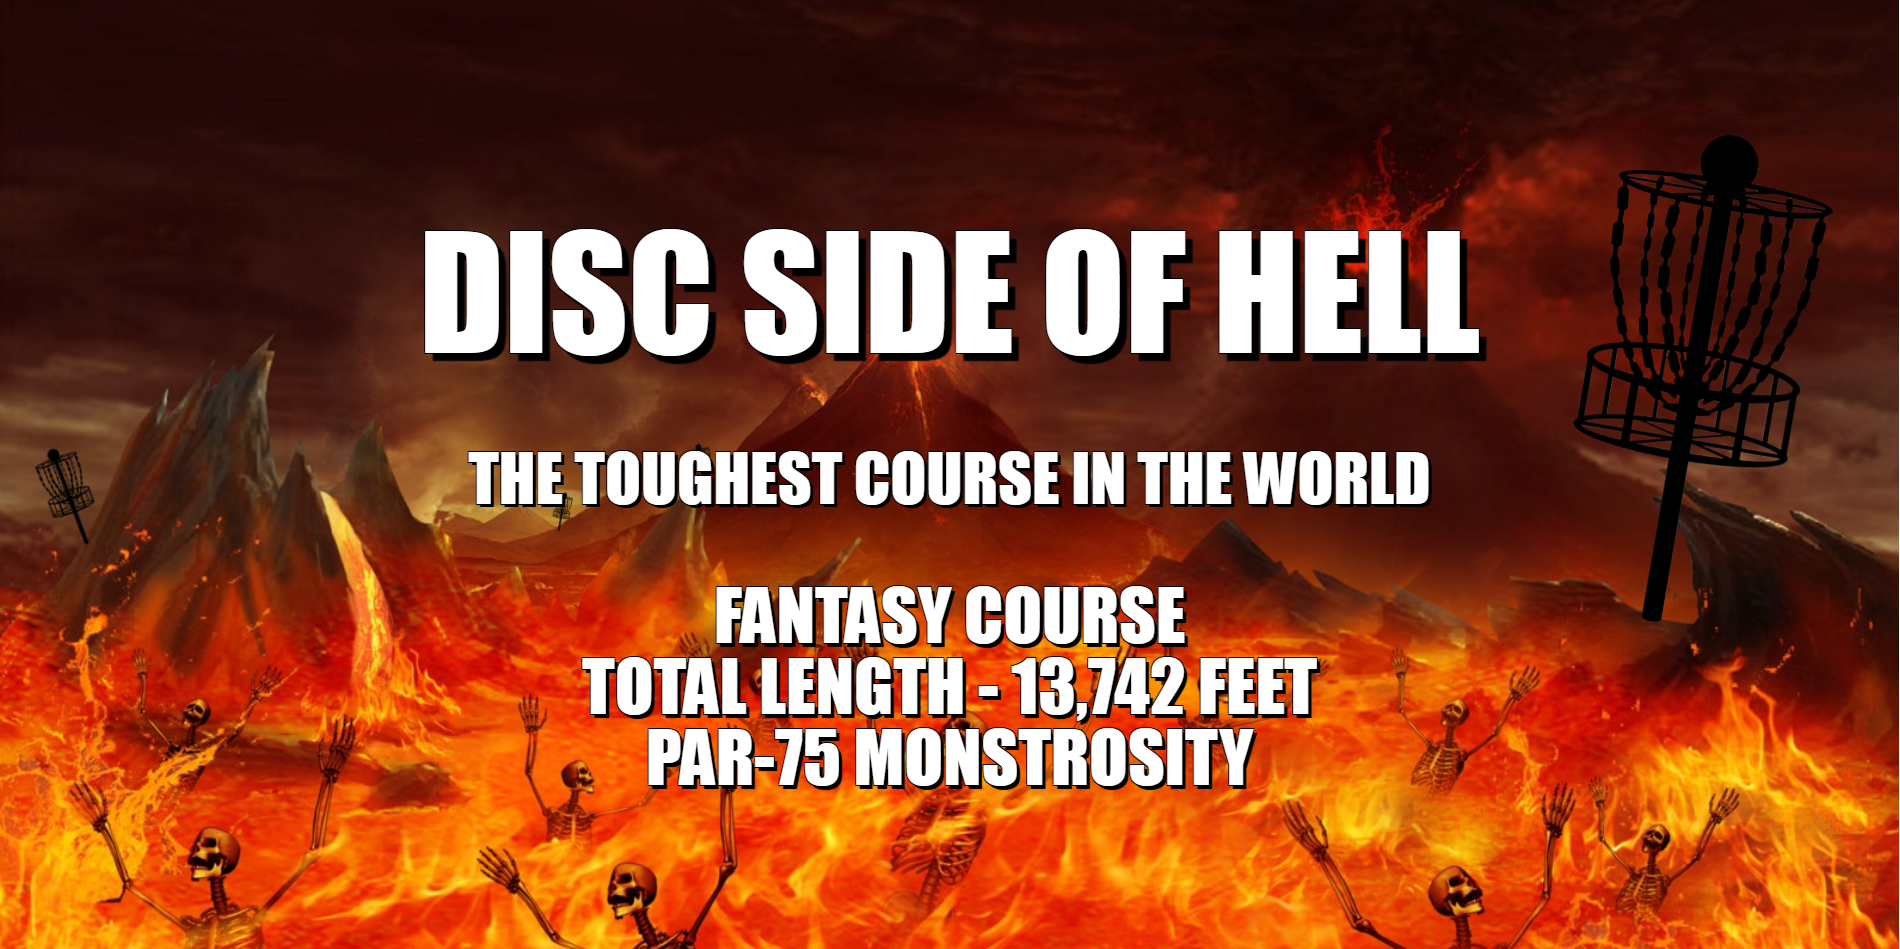 The toughest disc golf course in the world - Disc Side Of Hell - Fantasy course, PAR 75, 13742 feet